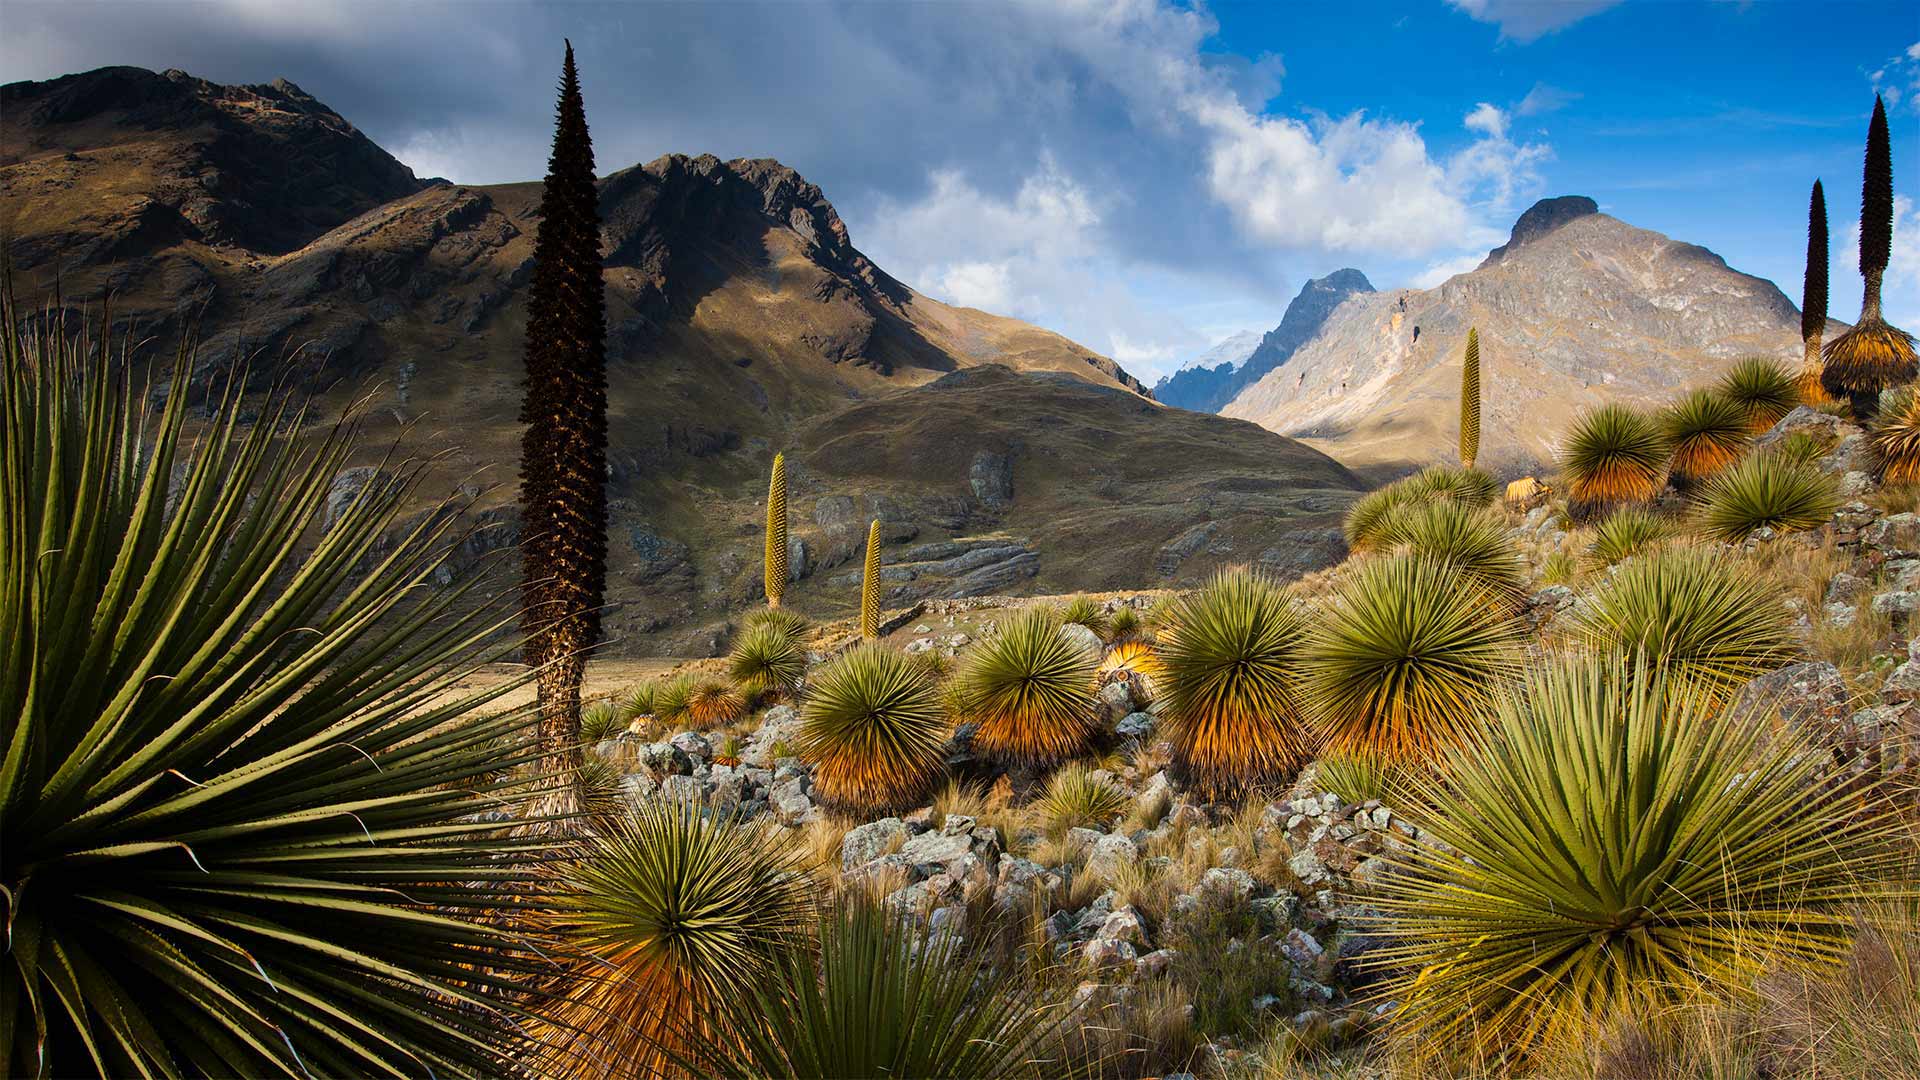 Queen of the Andes plants with the Cordillera Blanca massif in the background, Peru - Cyril Ruoso